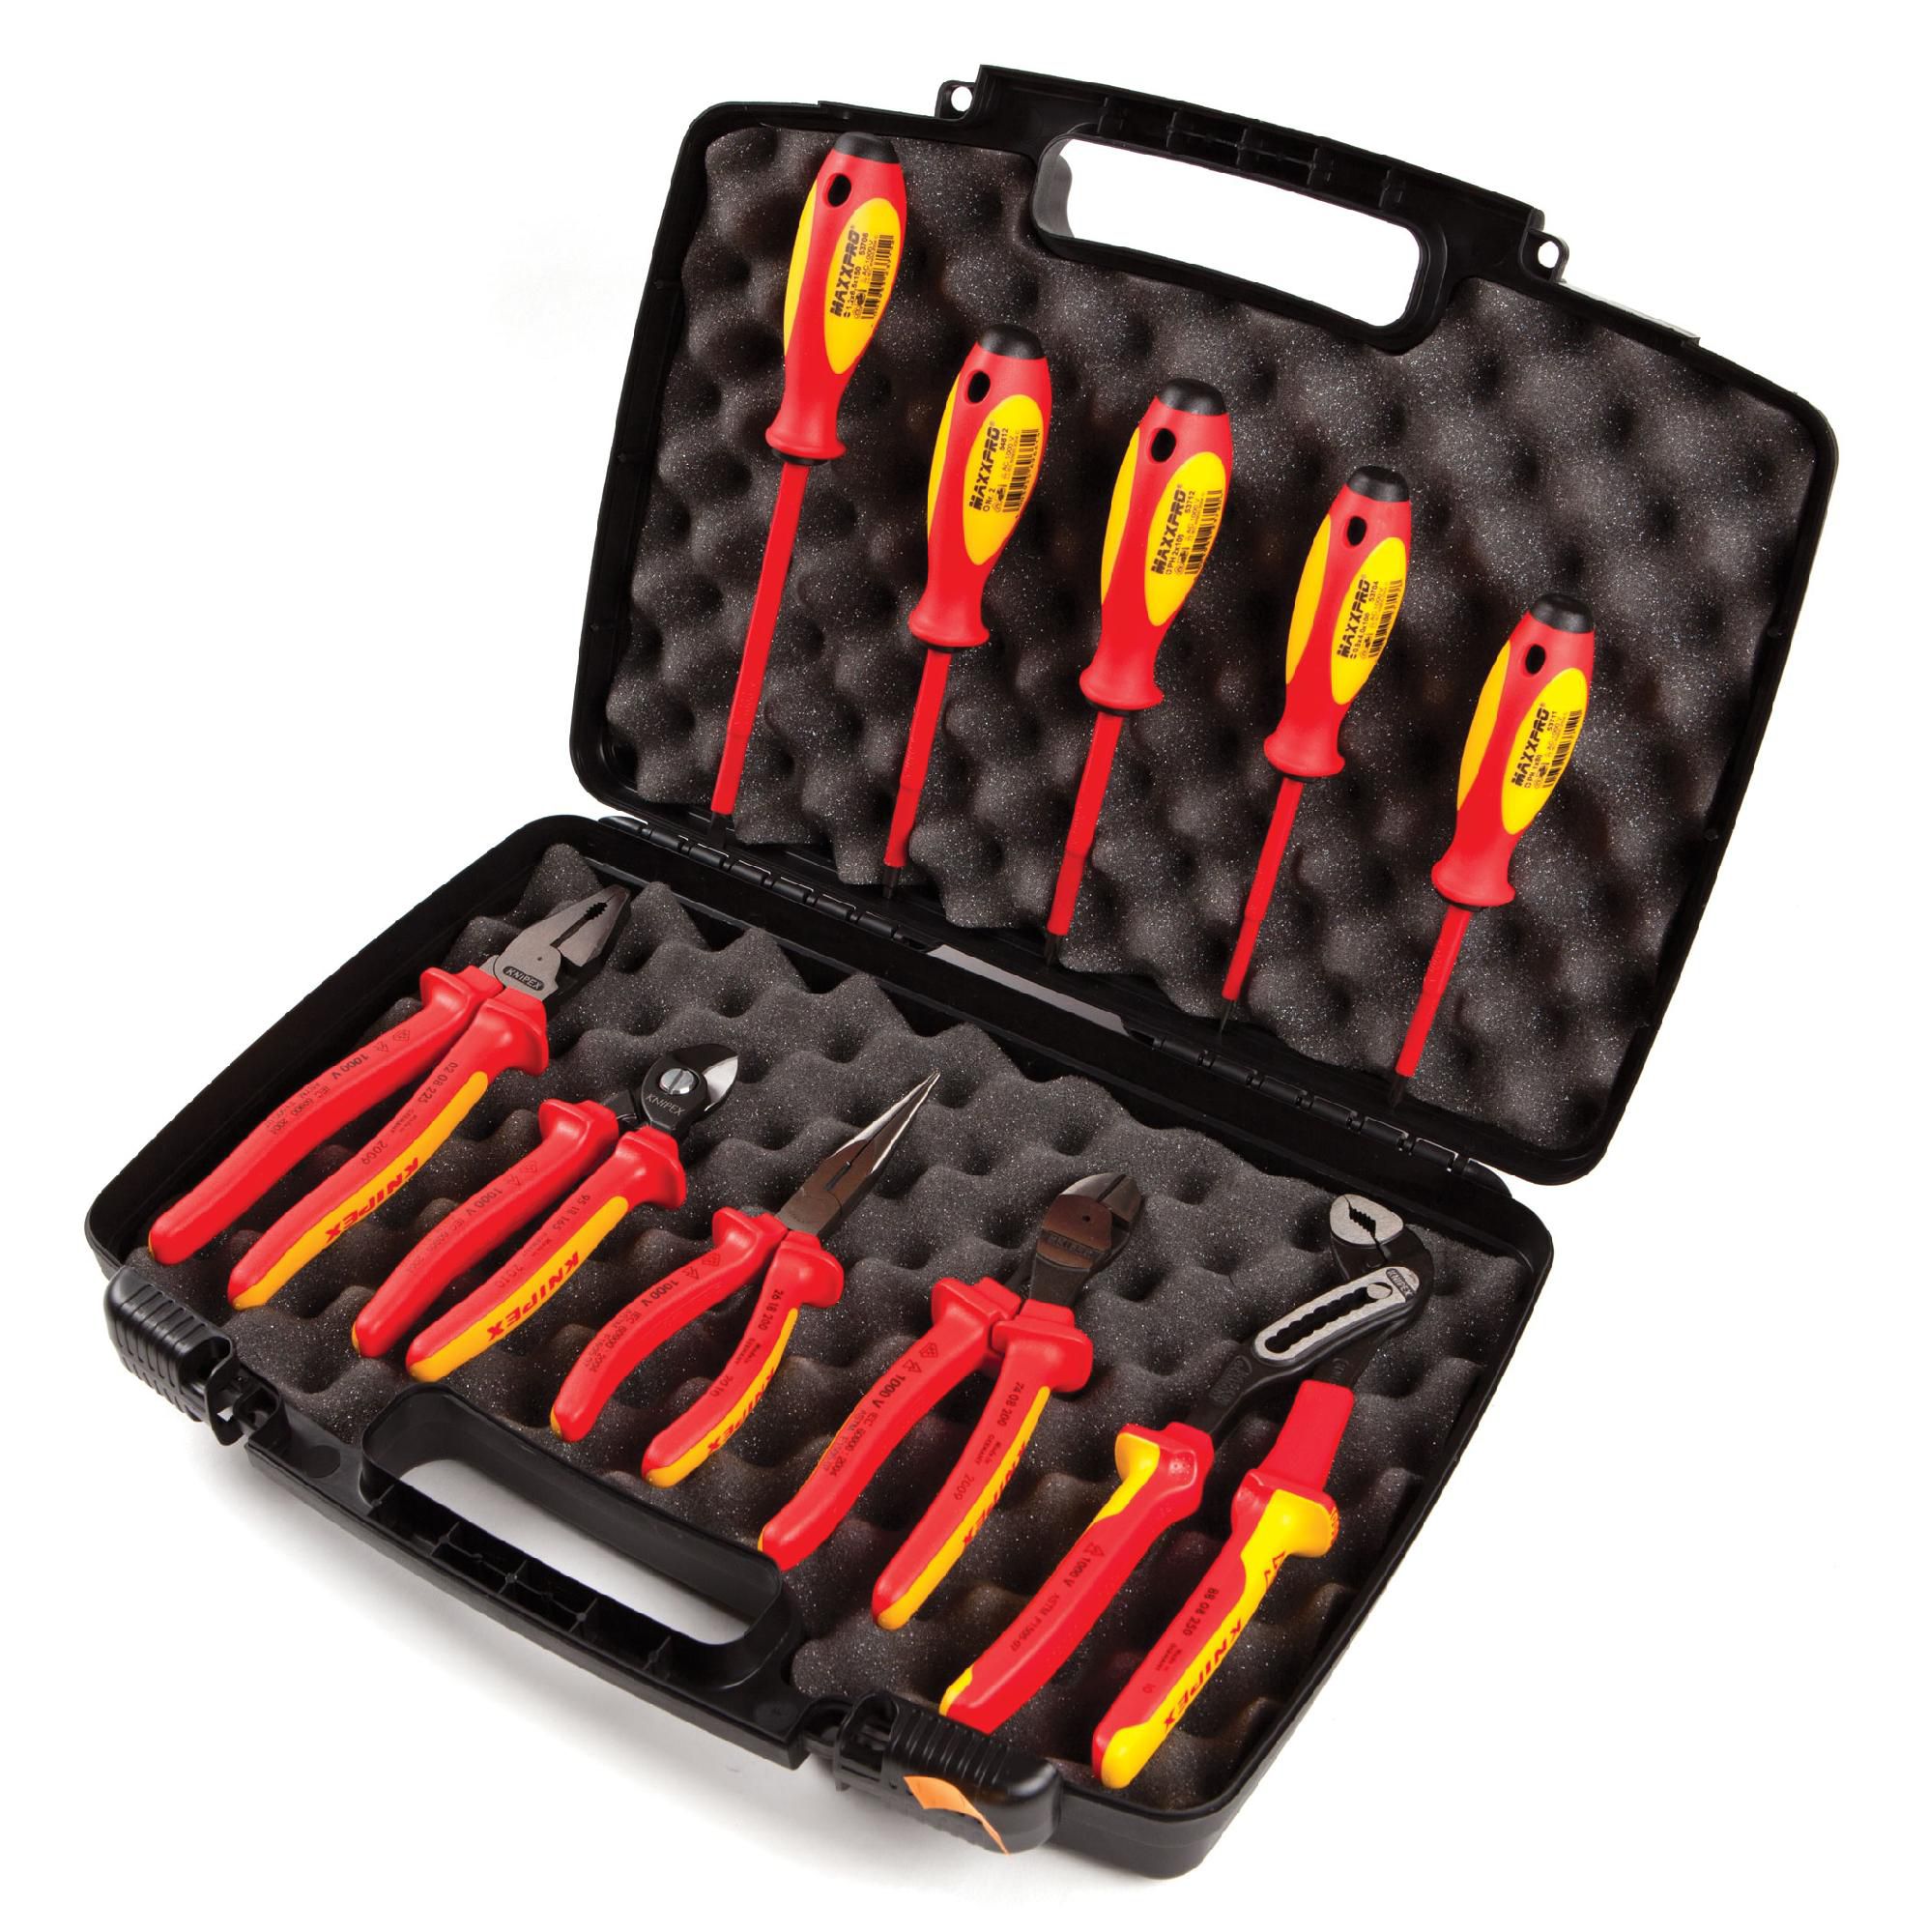 Knipex 1,000V Insulated 10 Pc Tool Set